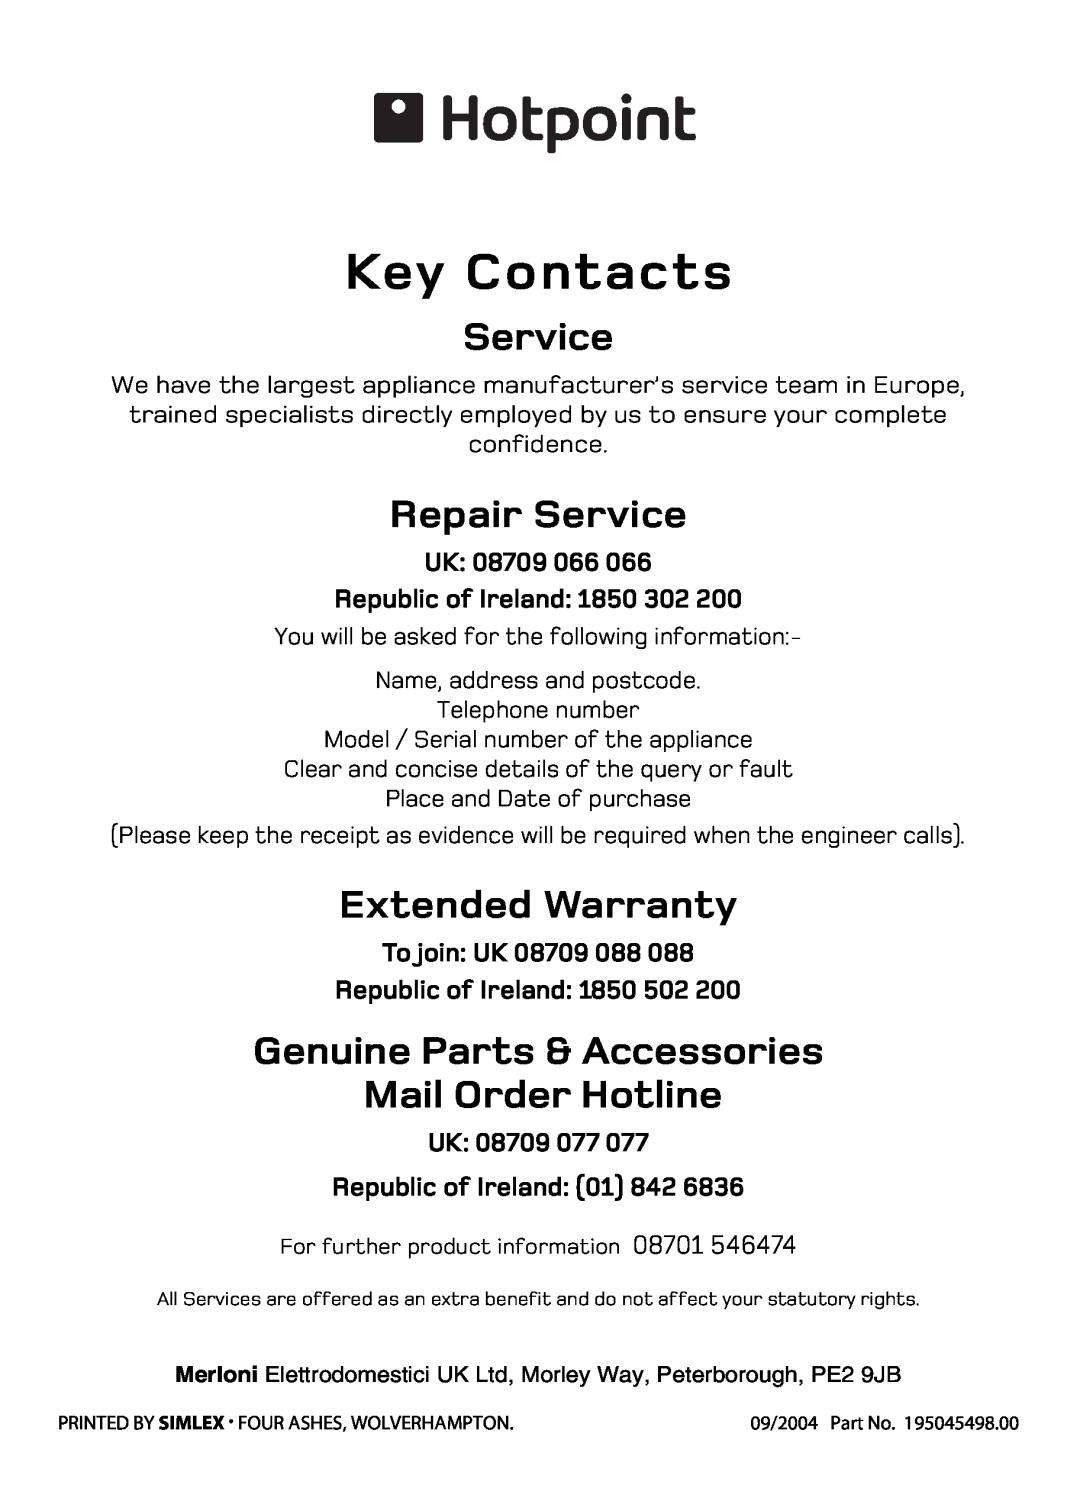 Hotpoint H150E manual Repair Service, Extended Warranty, Genuine Parts & Accessories Mail Order Hotline, Key Contacts 